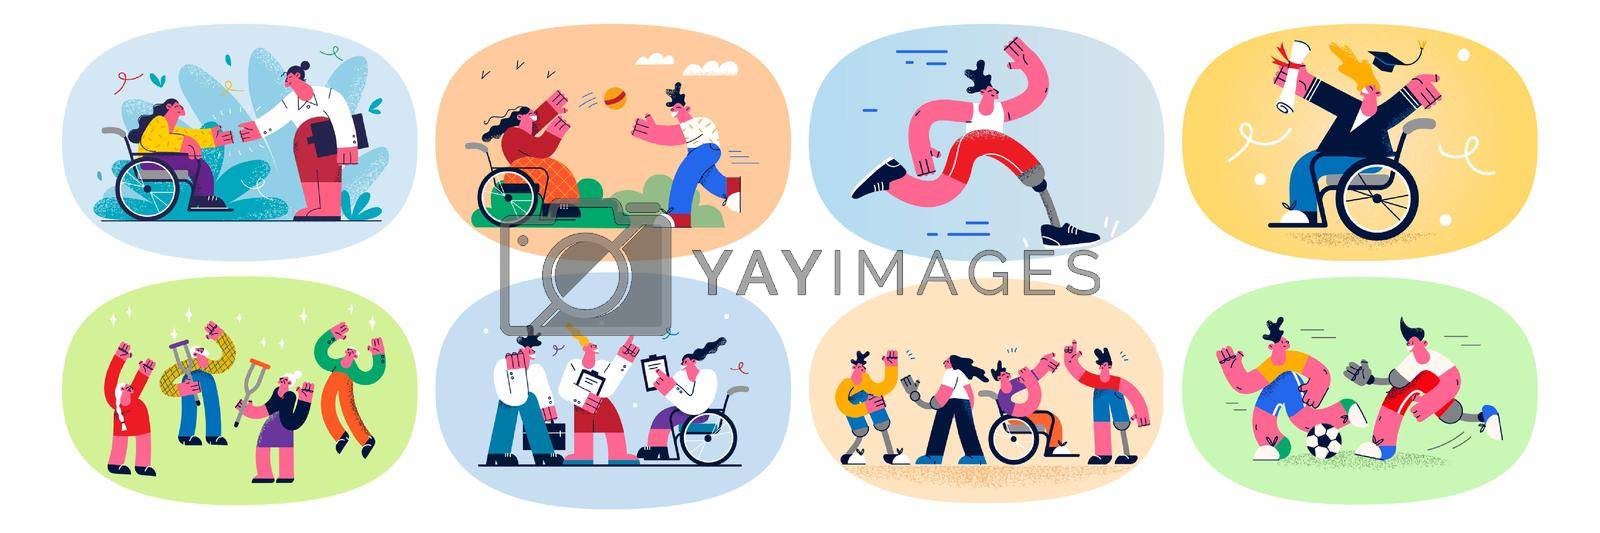 Set of diverse people with physical disabilities have fun play and graduate from university. Collection of men and women with chronic disability live full life. Diversity. Flat vector illustration.